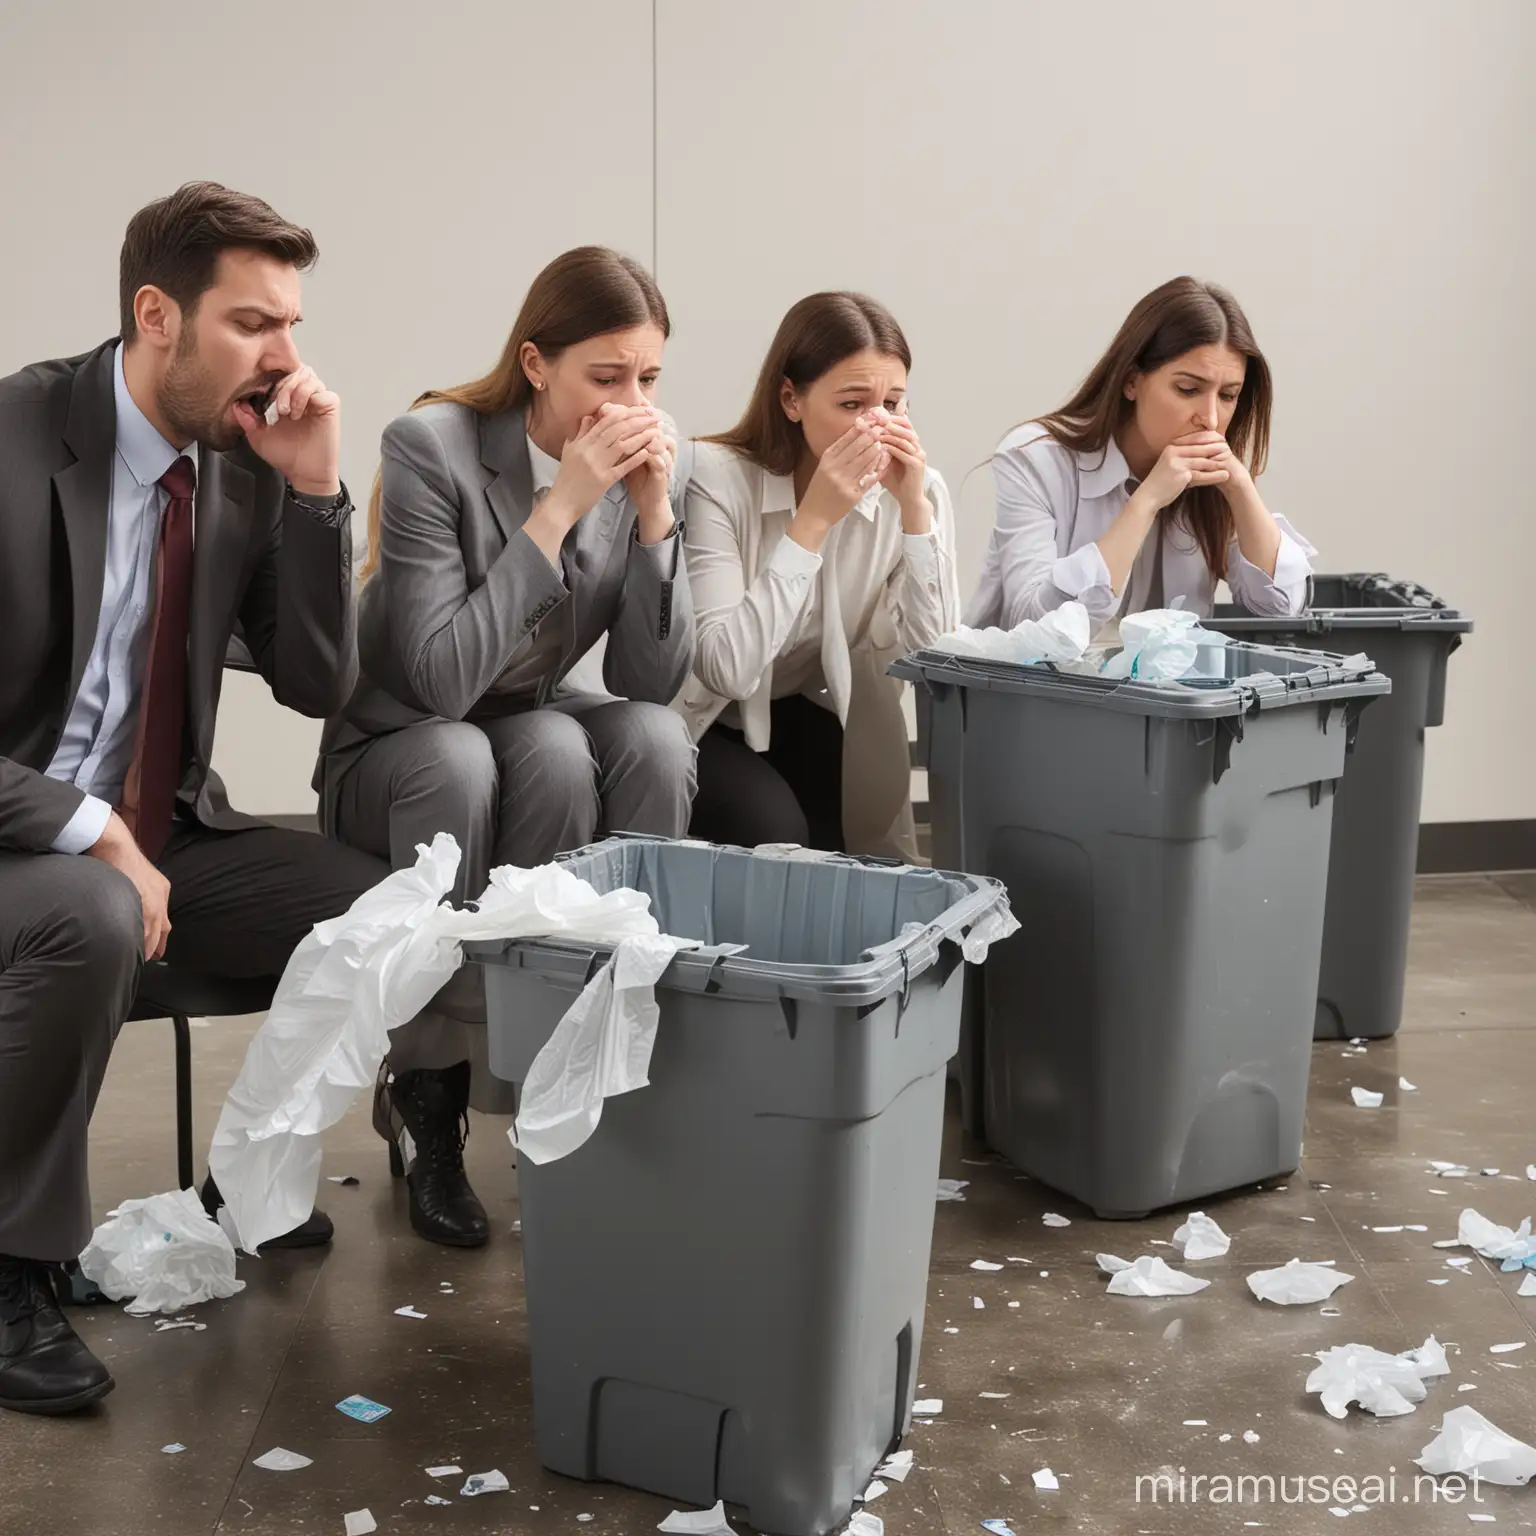 Office Employees Experiencing Sudden Illnesses While Leaning Over Garbage Cans